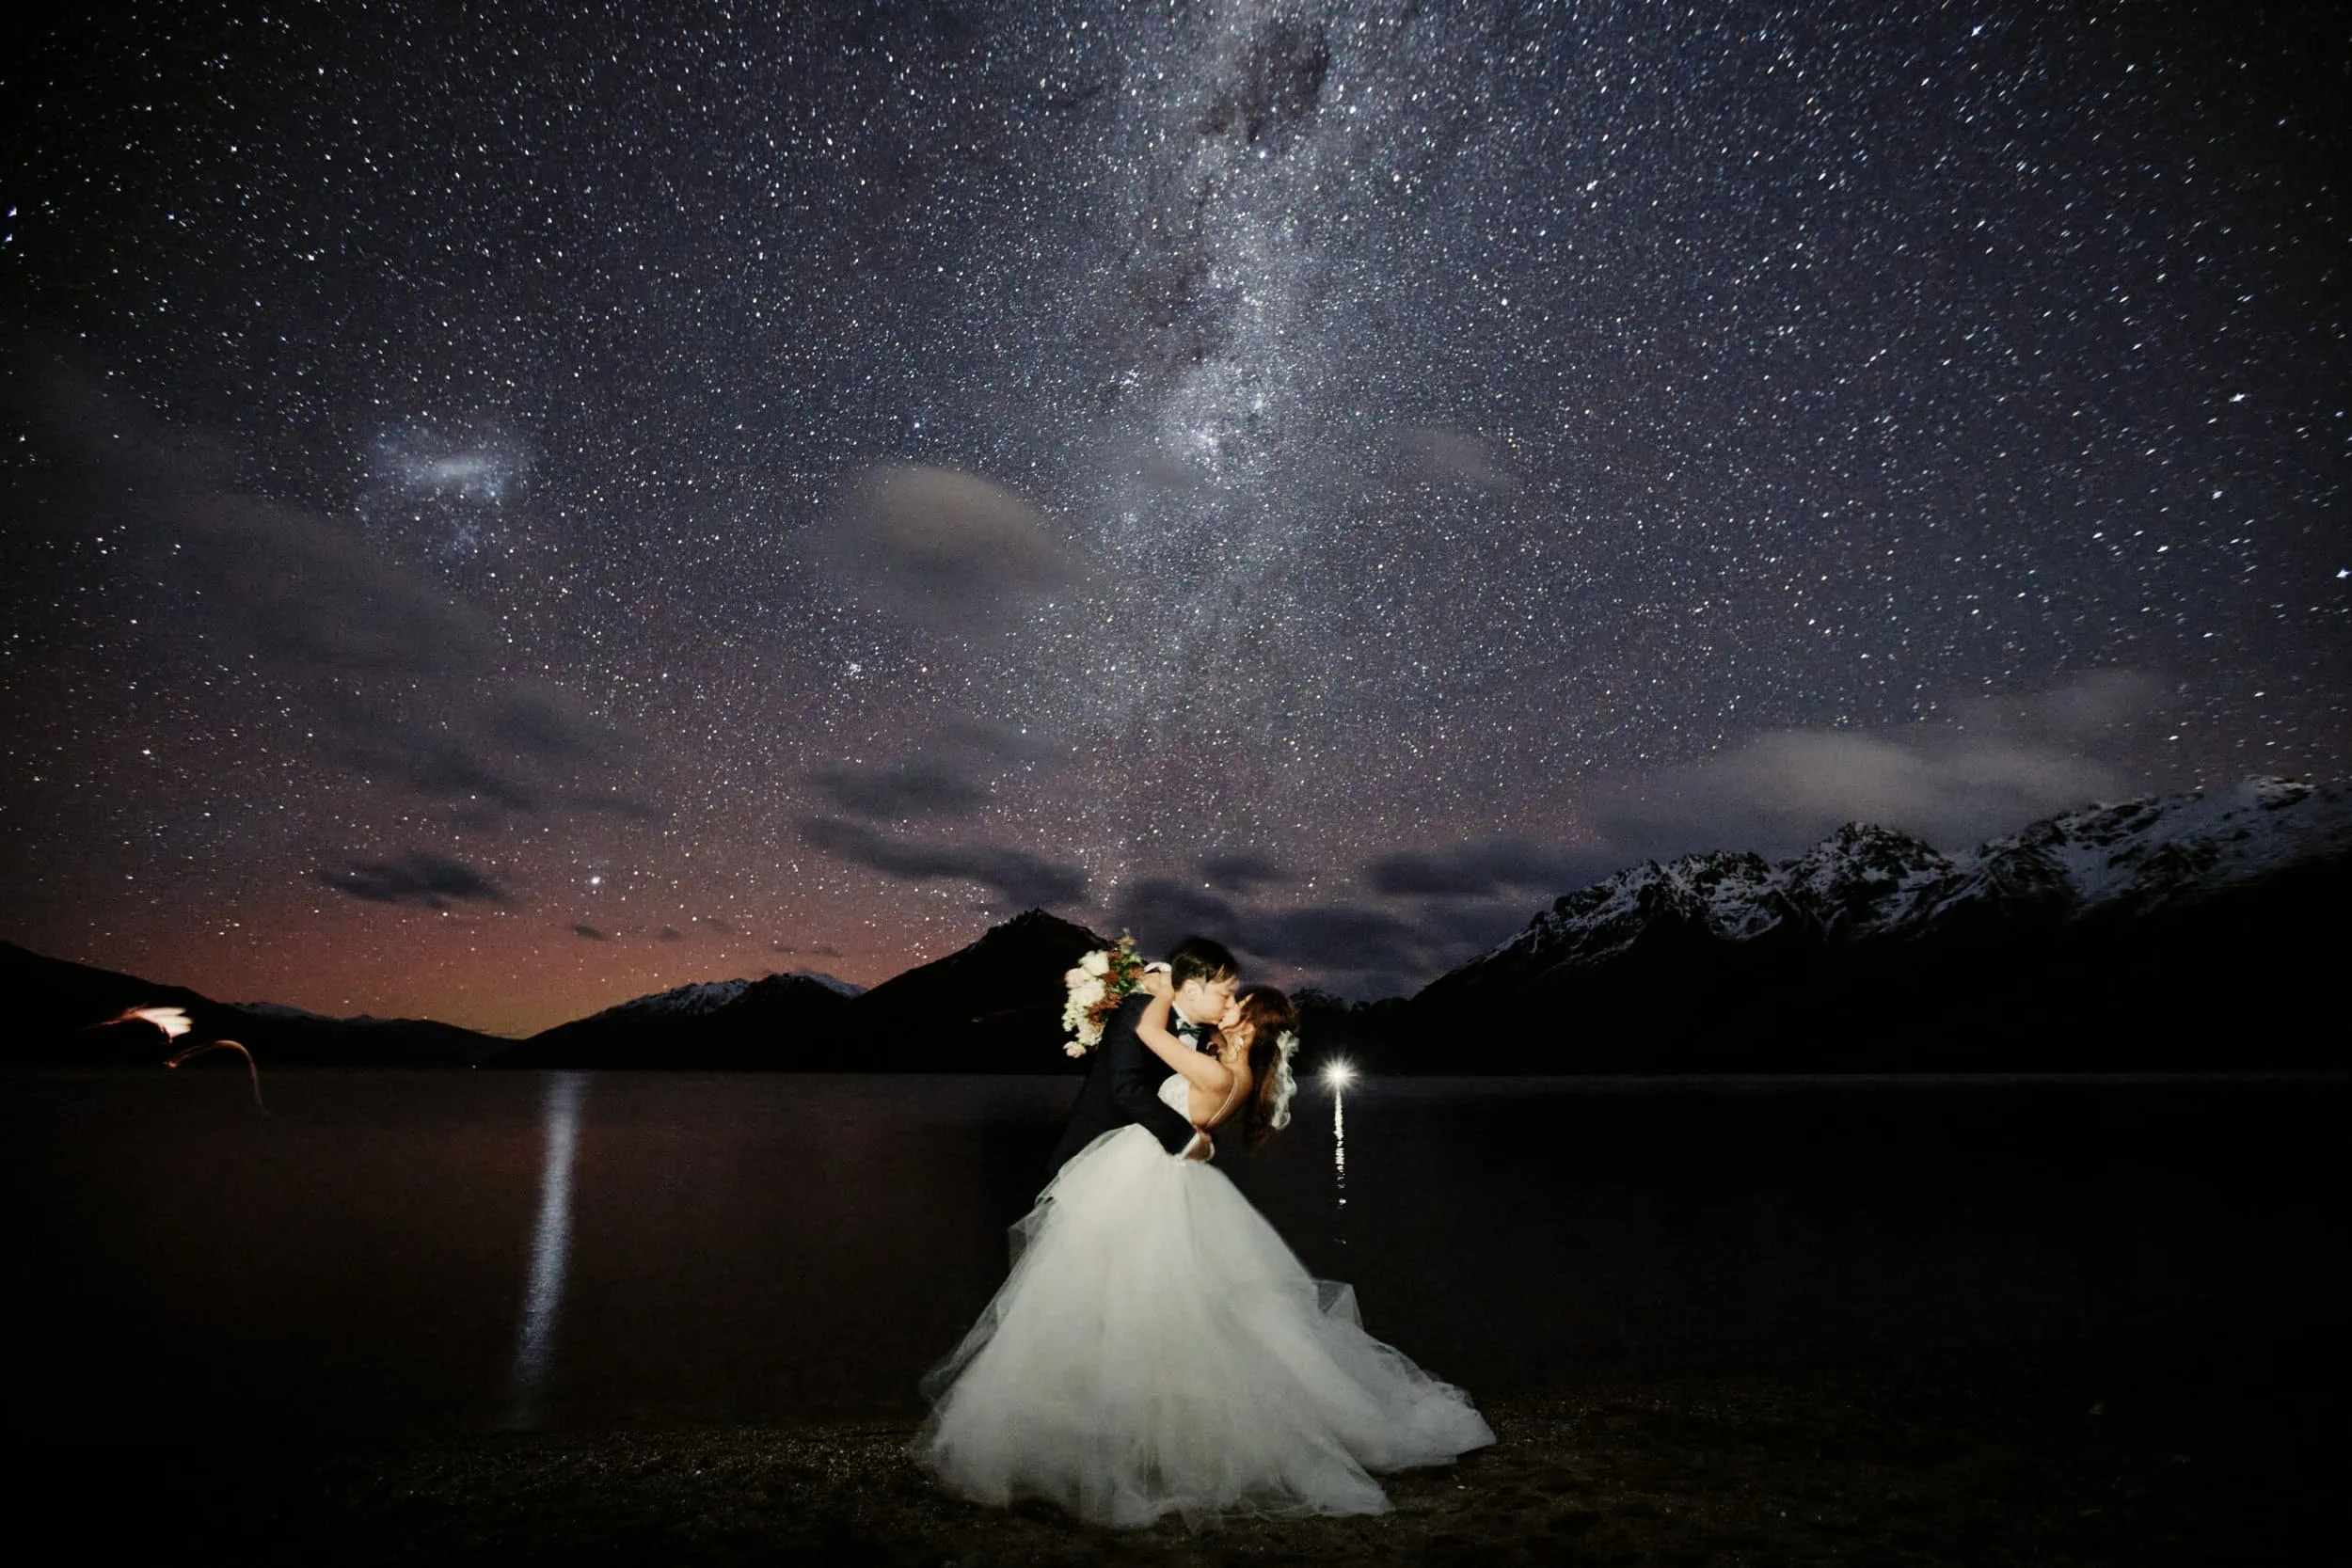 Stephanie and Carven's romantic elopement captured under the starry sky